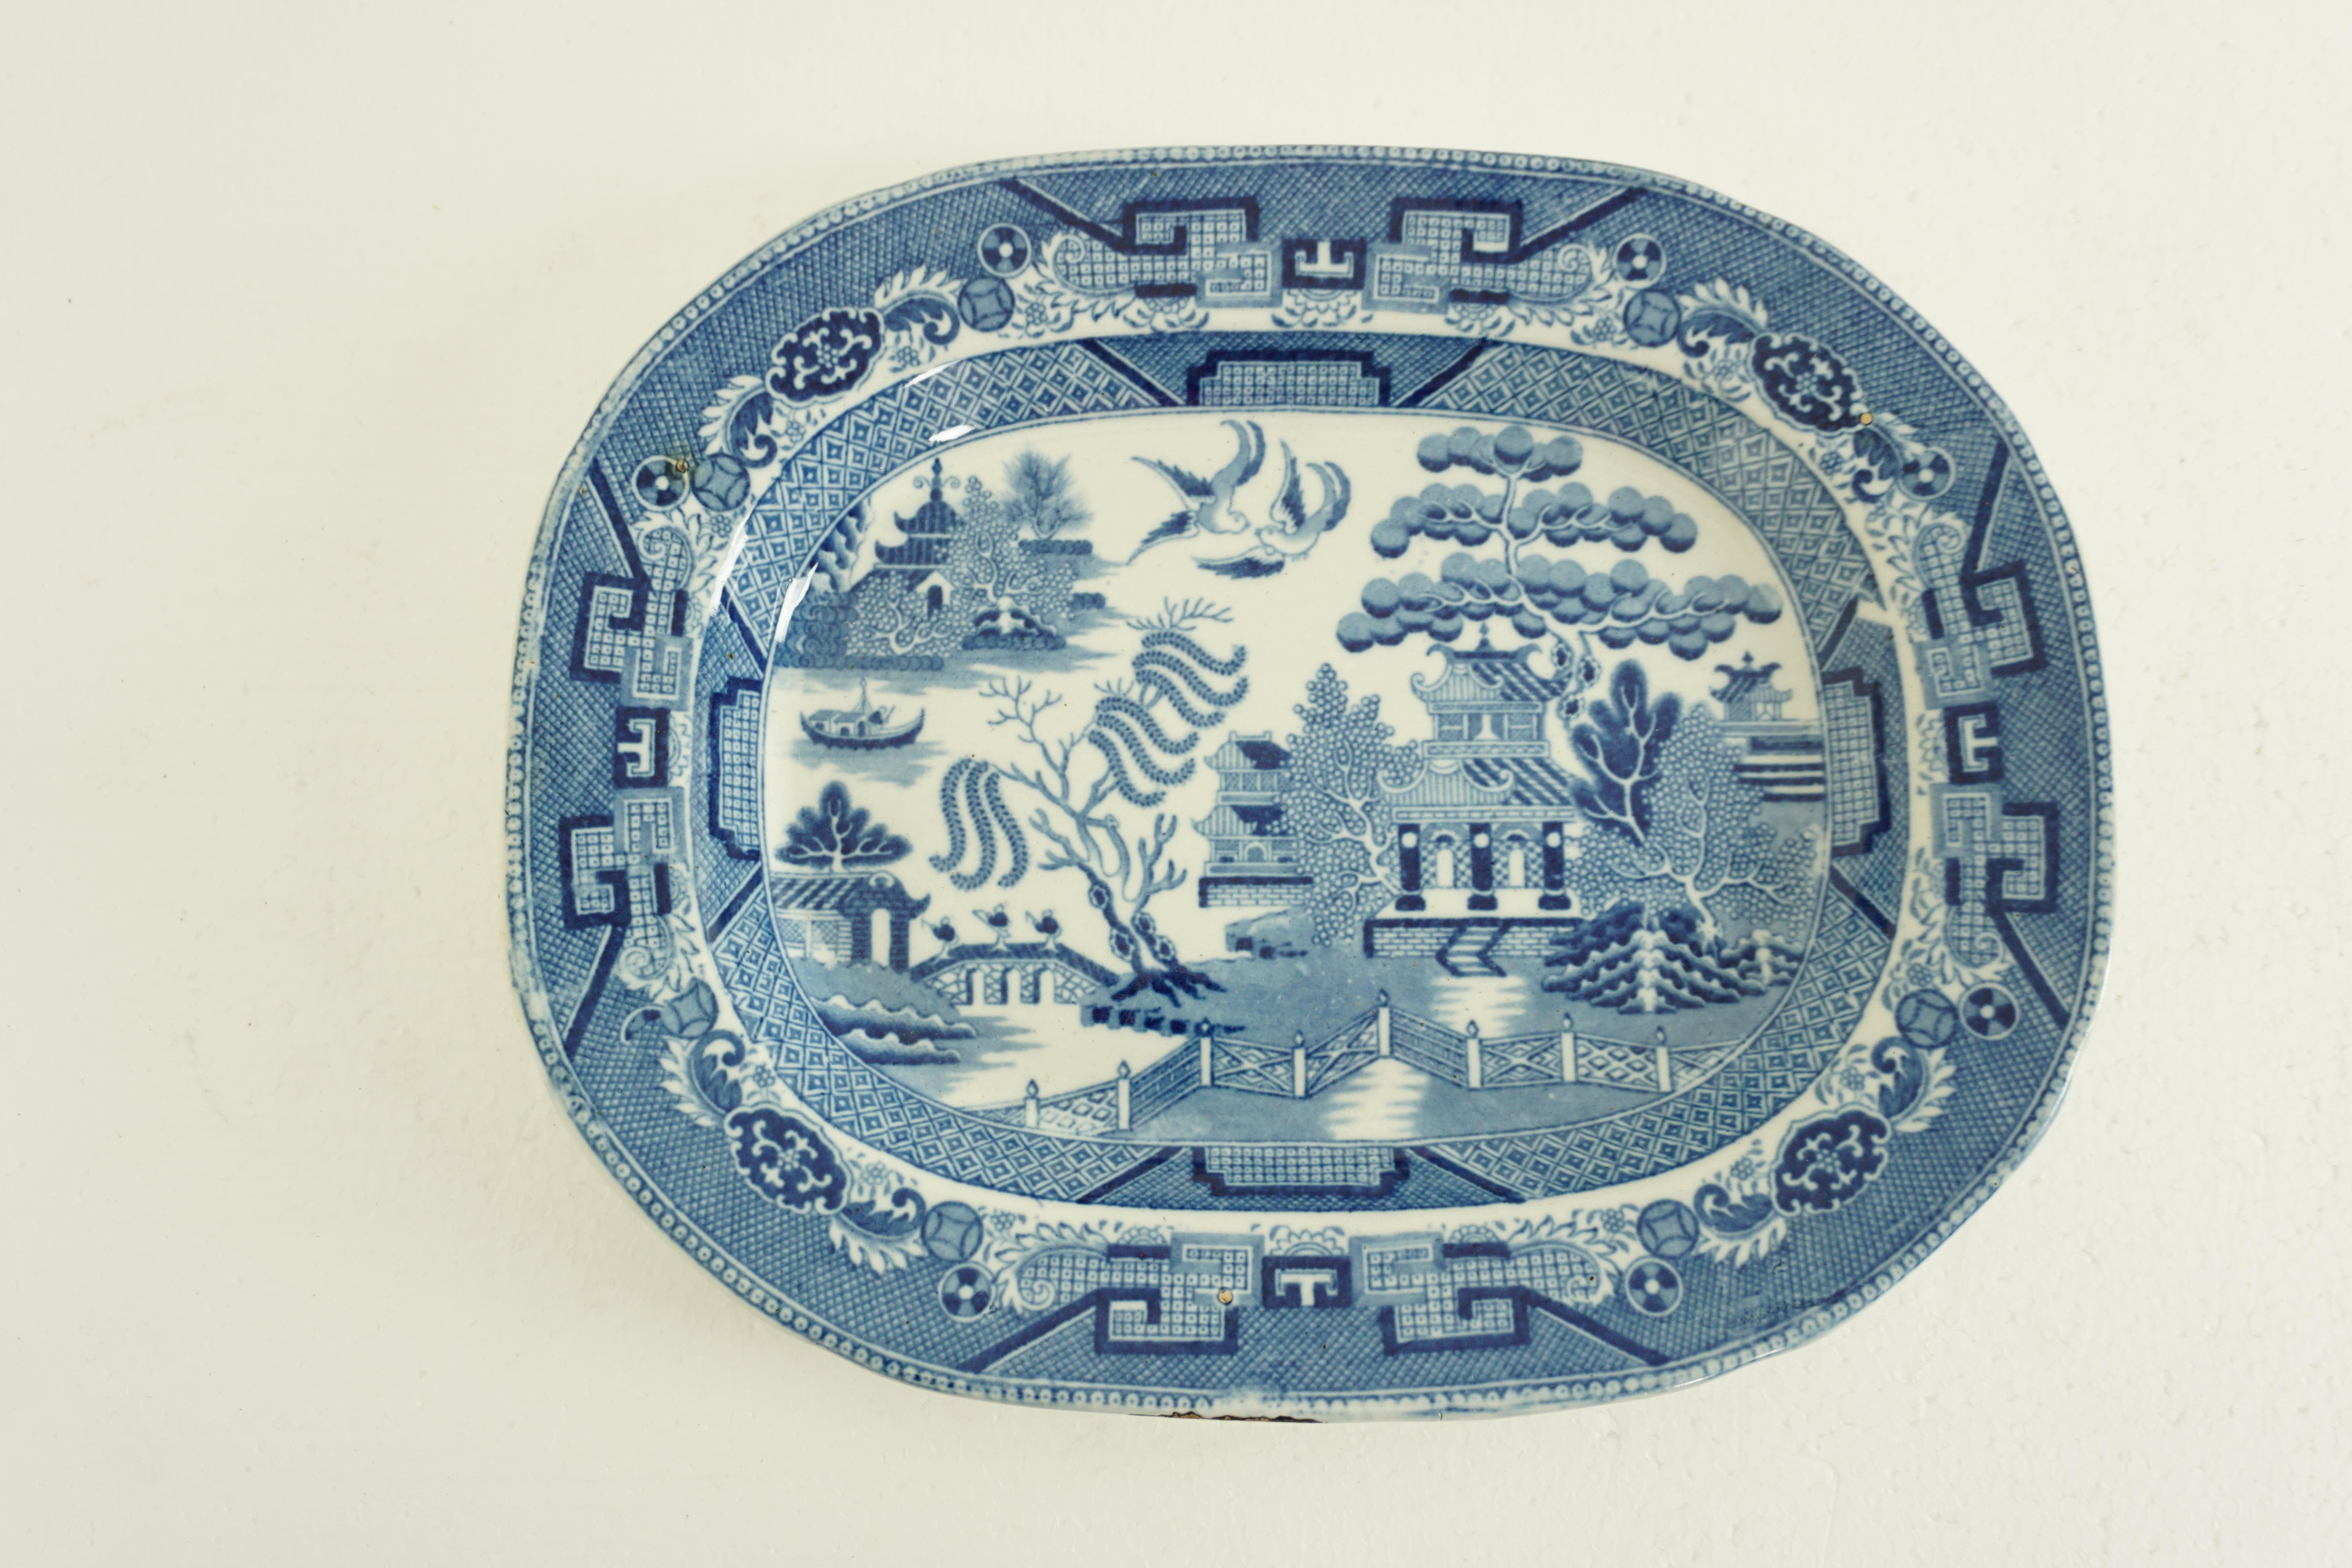 Antique blue willow platter transferware pottery, England circa 1870, 1964A 

England

circa 1870
Willow pattern design 
Long chip to side surface

$95

   

Measures: 13.5